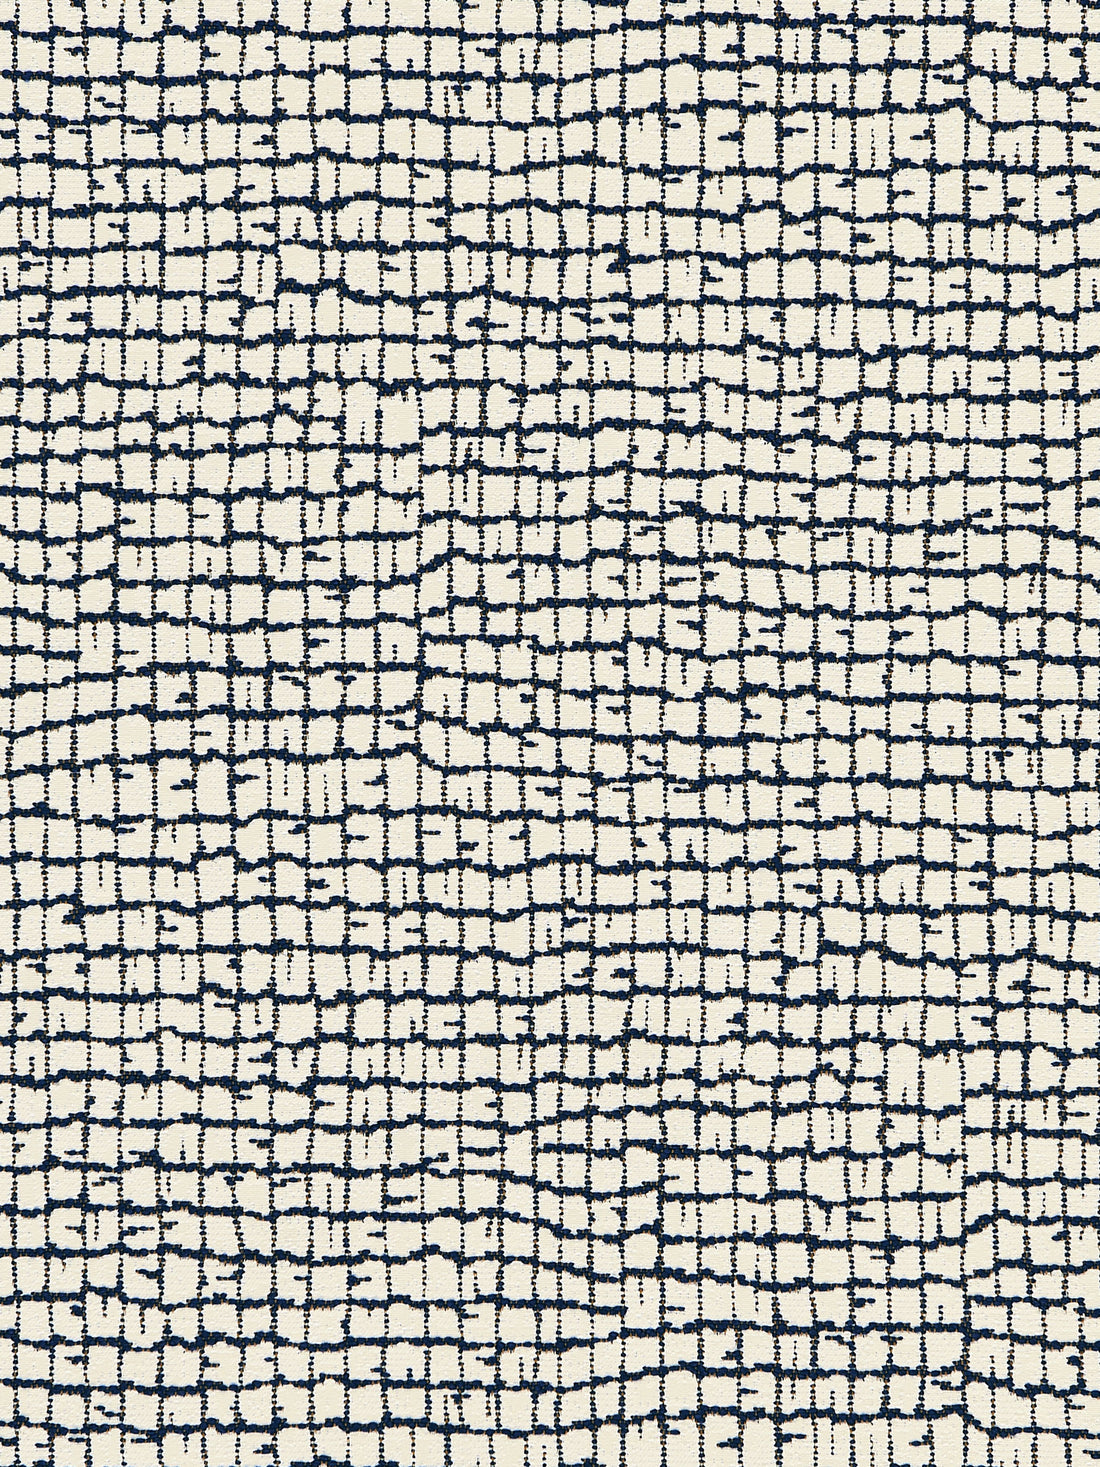 Troya Beach fabric in navy color - pattern number PO 0004TROY - by Scalamandre in the Old World Weavers collection